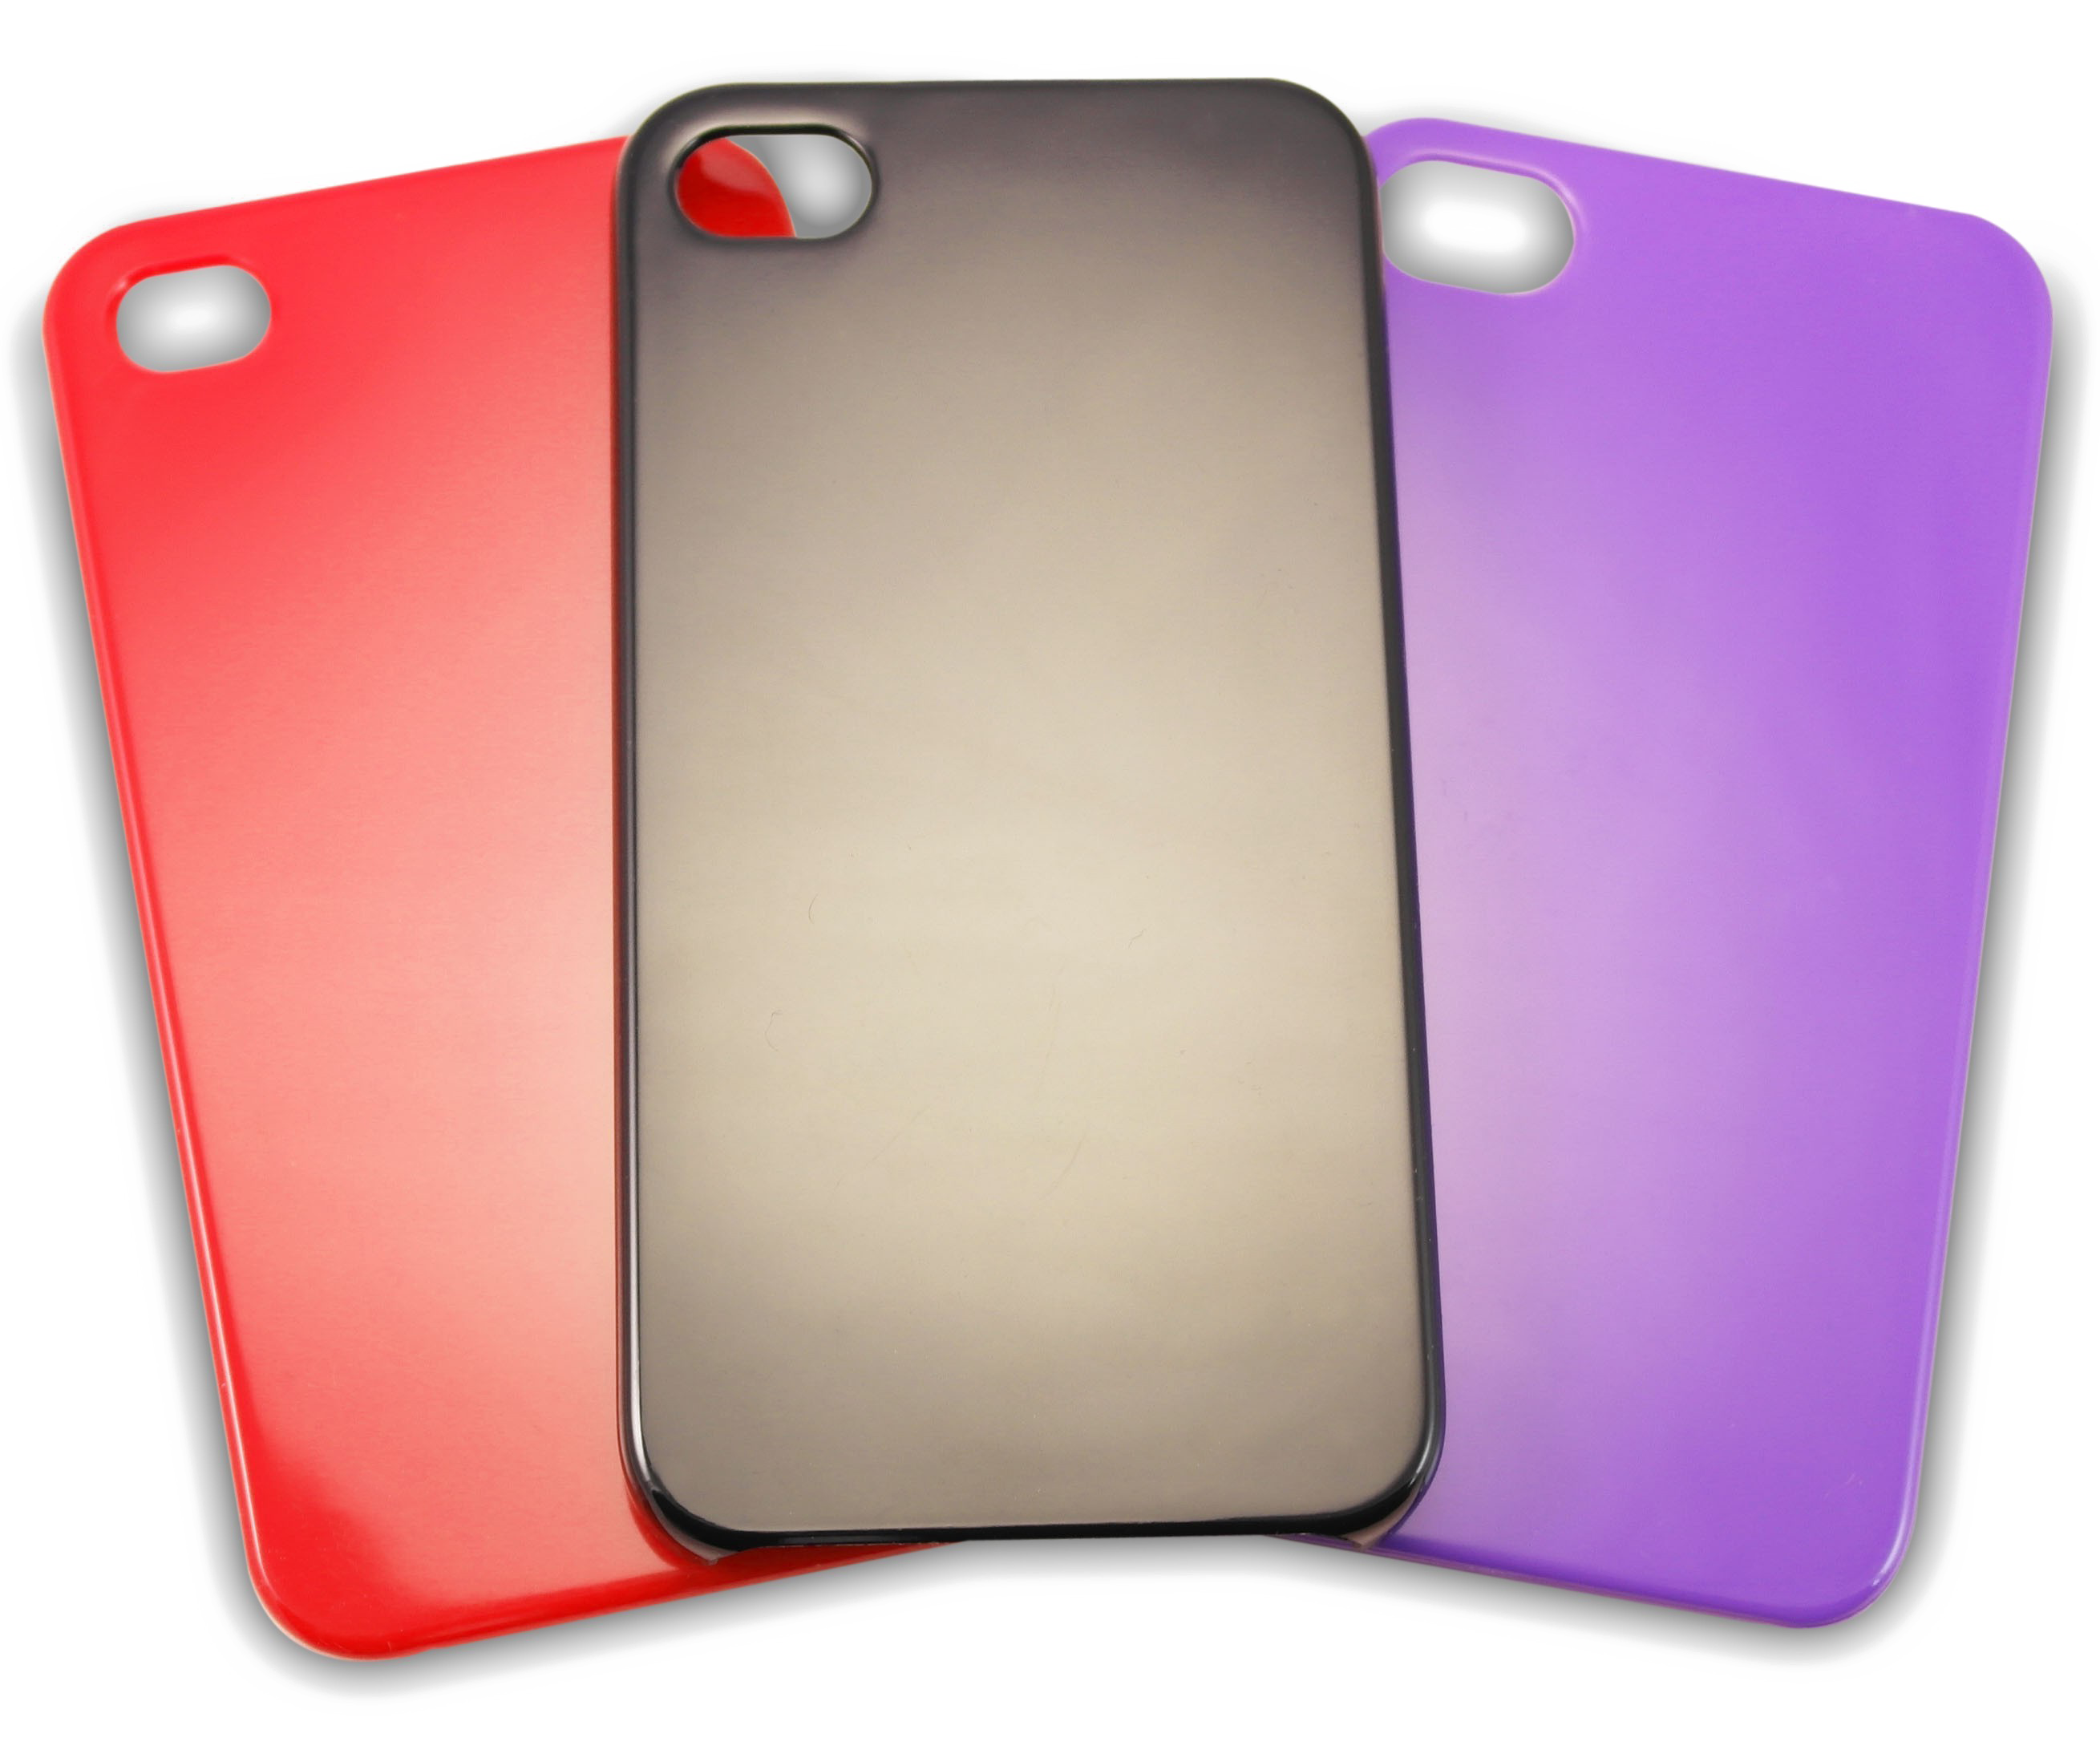 Mobile Cover Photos PNG Download Free PNG Image